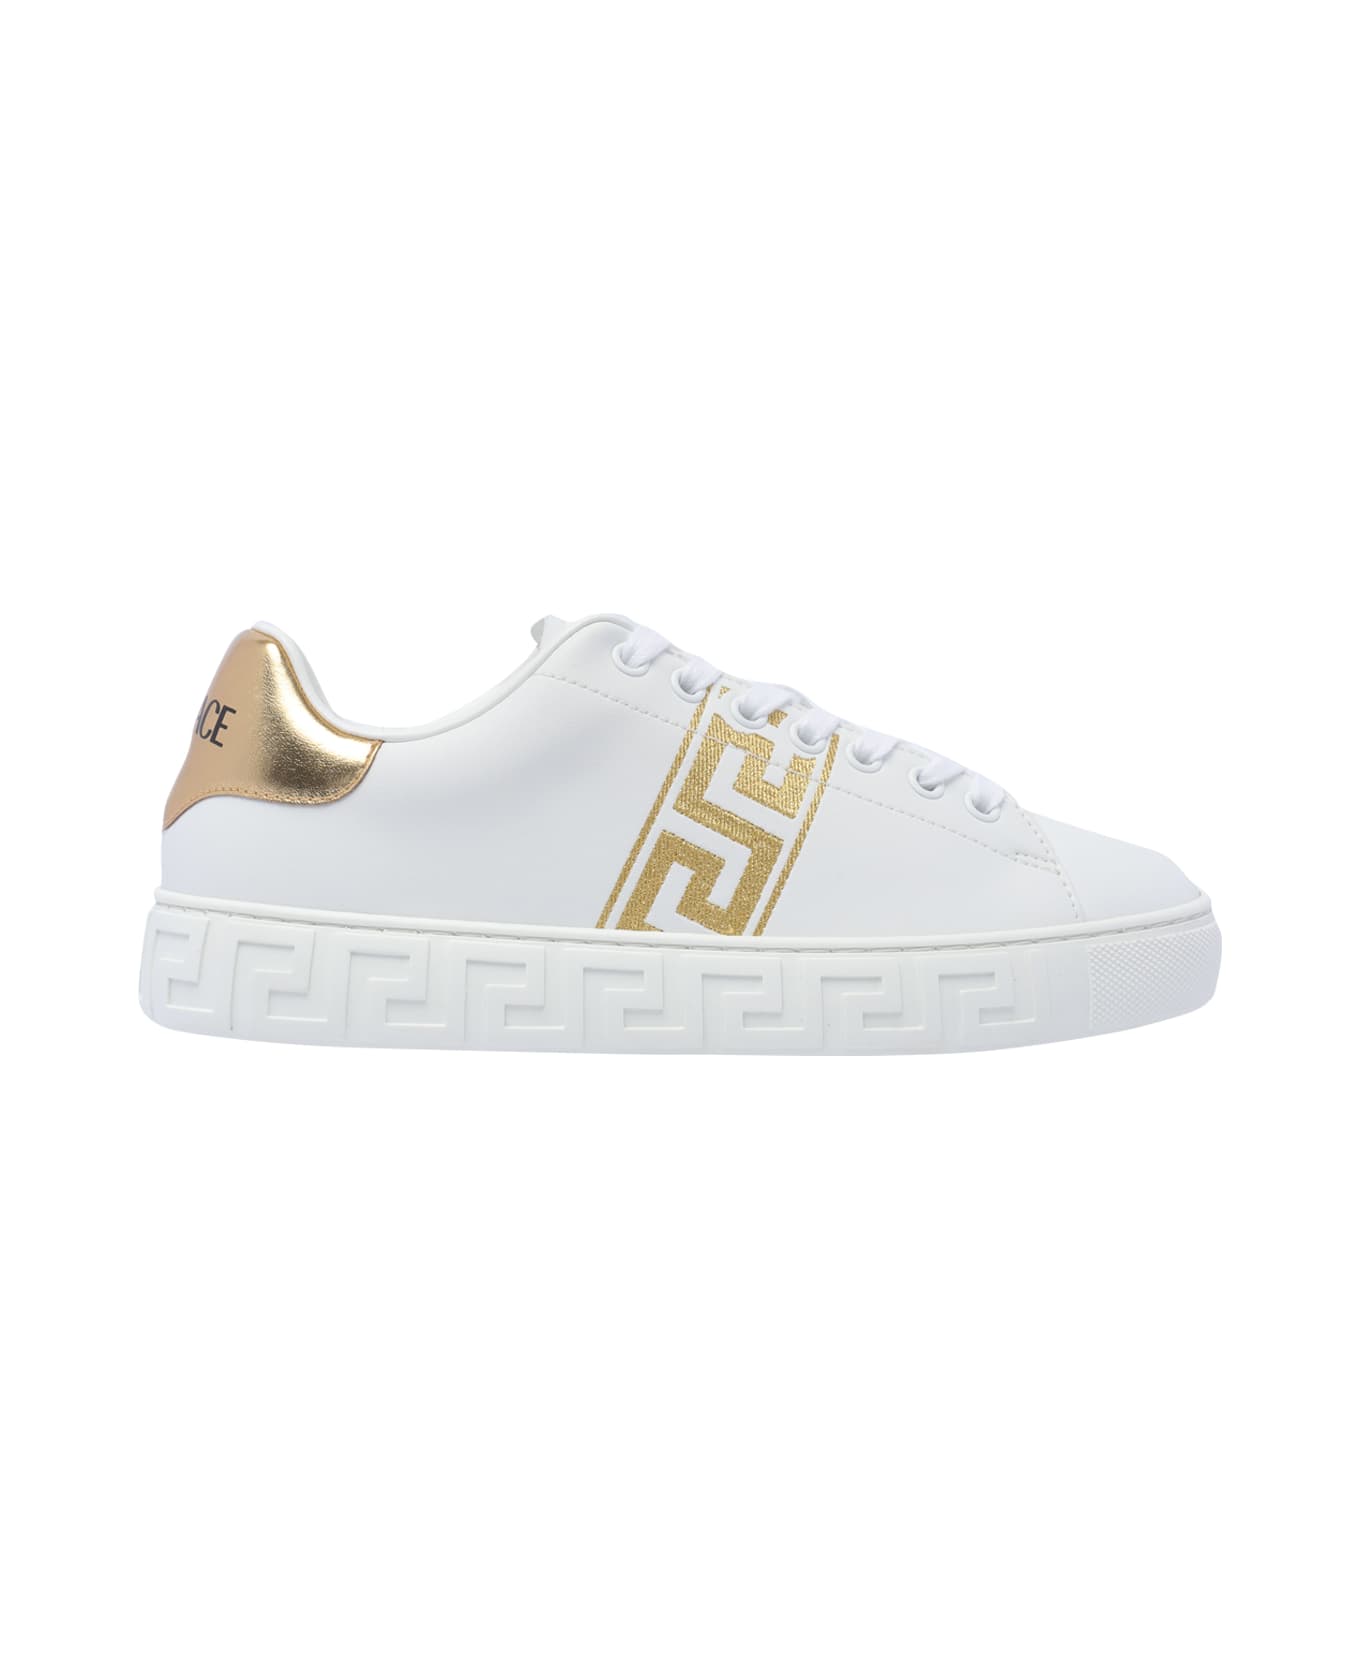 Versace Greca Embroidered Sneakers - White スニーカー